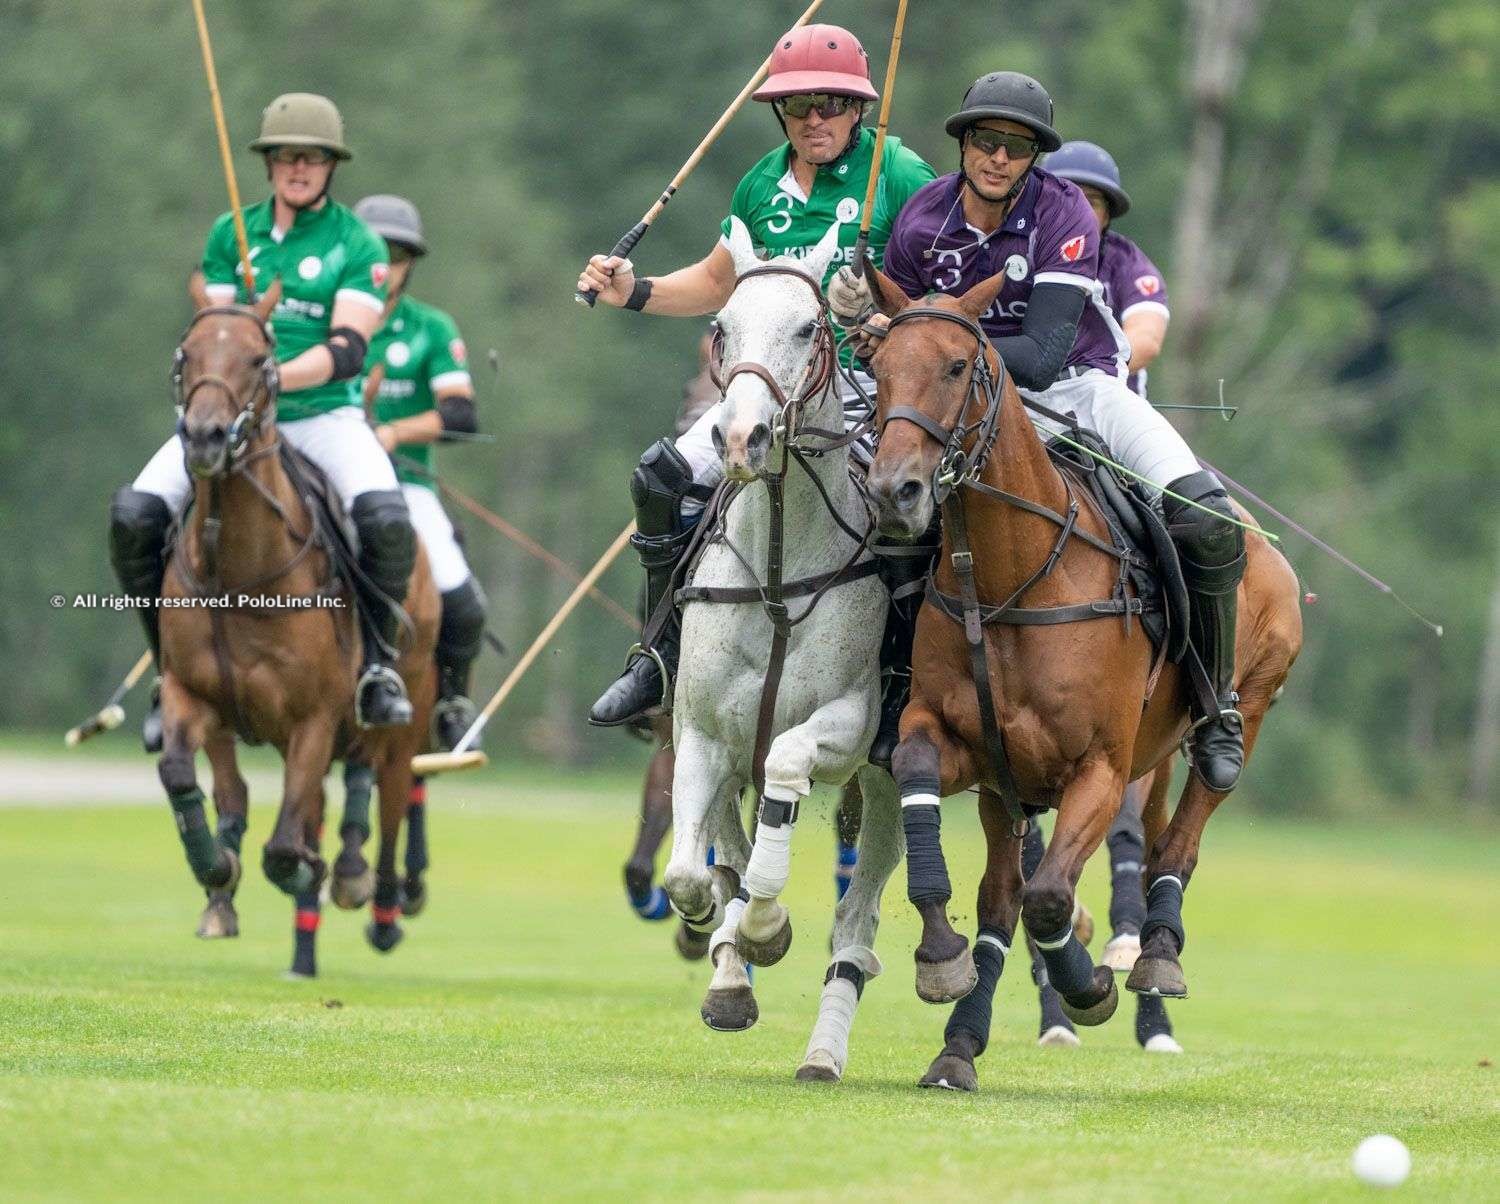 Hublot Polo Gold Cup Gstaad, Day 1